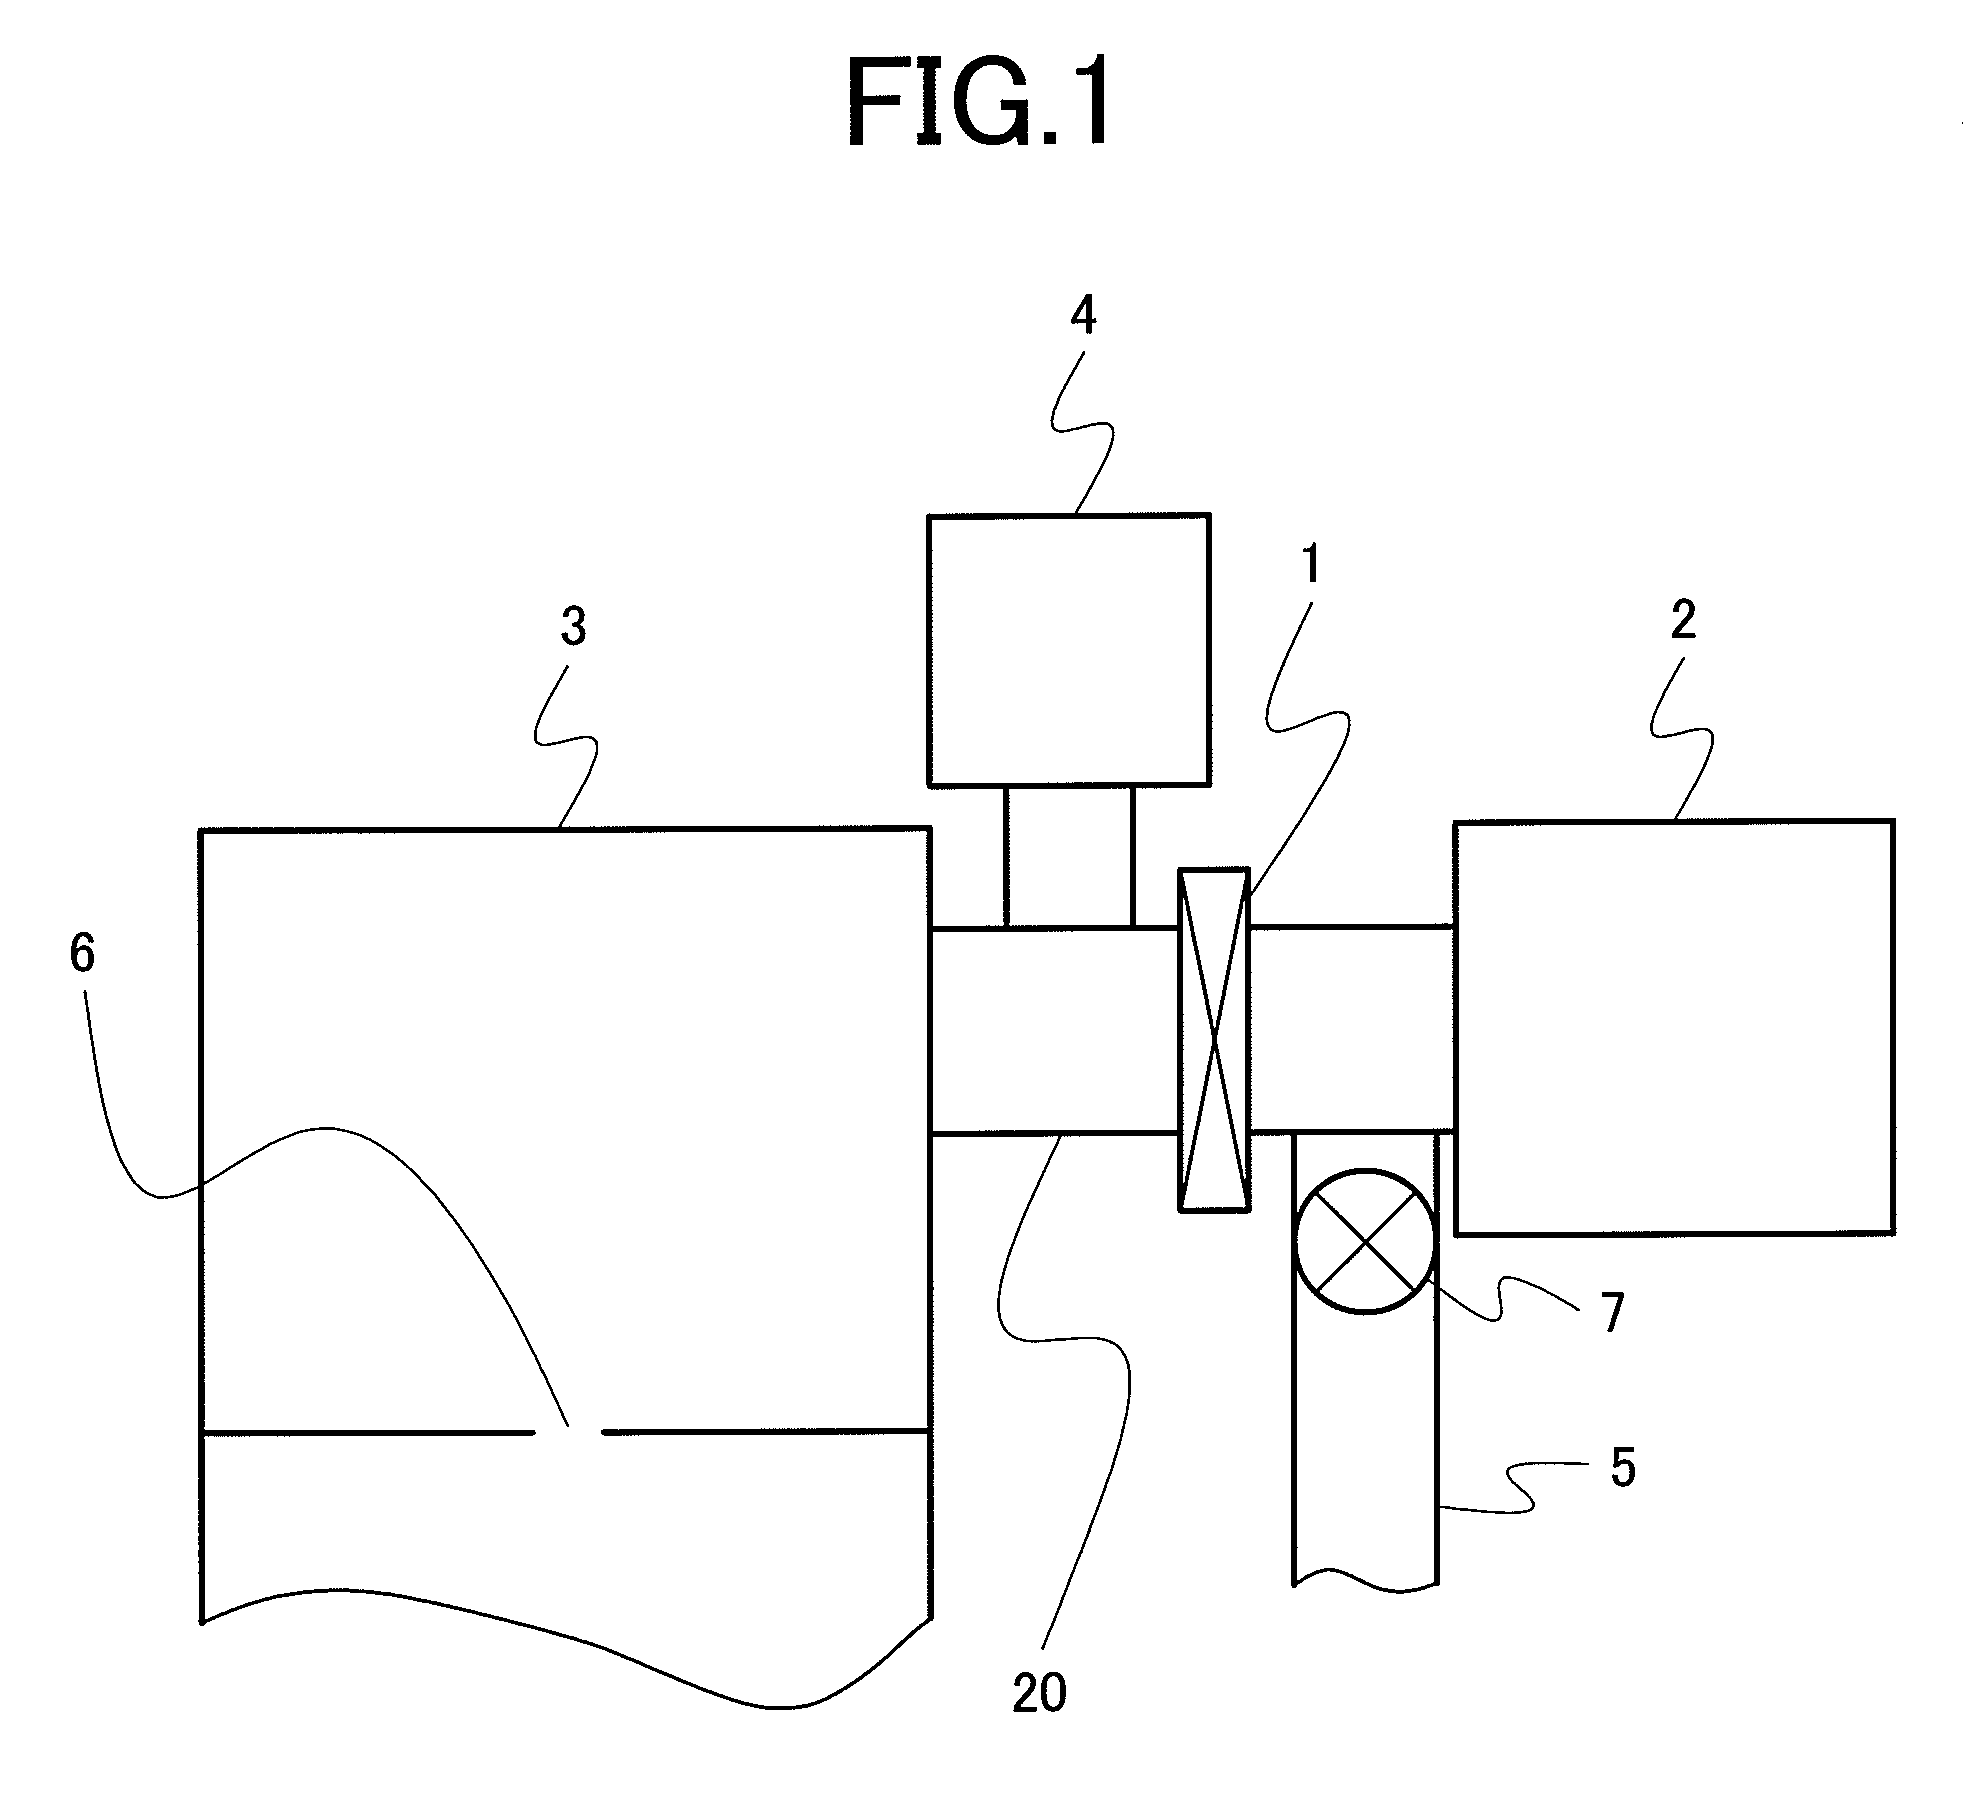 Charged particle beam system and method for evacuation of the system